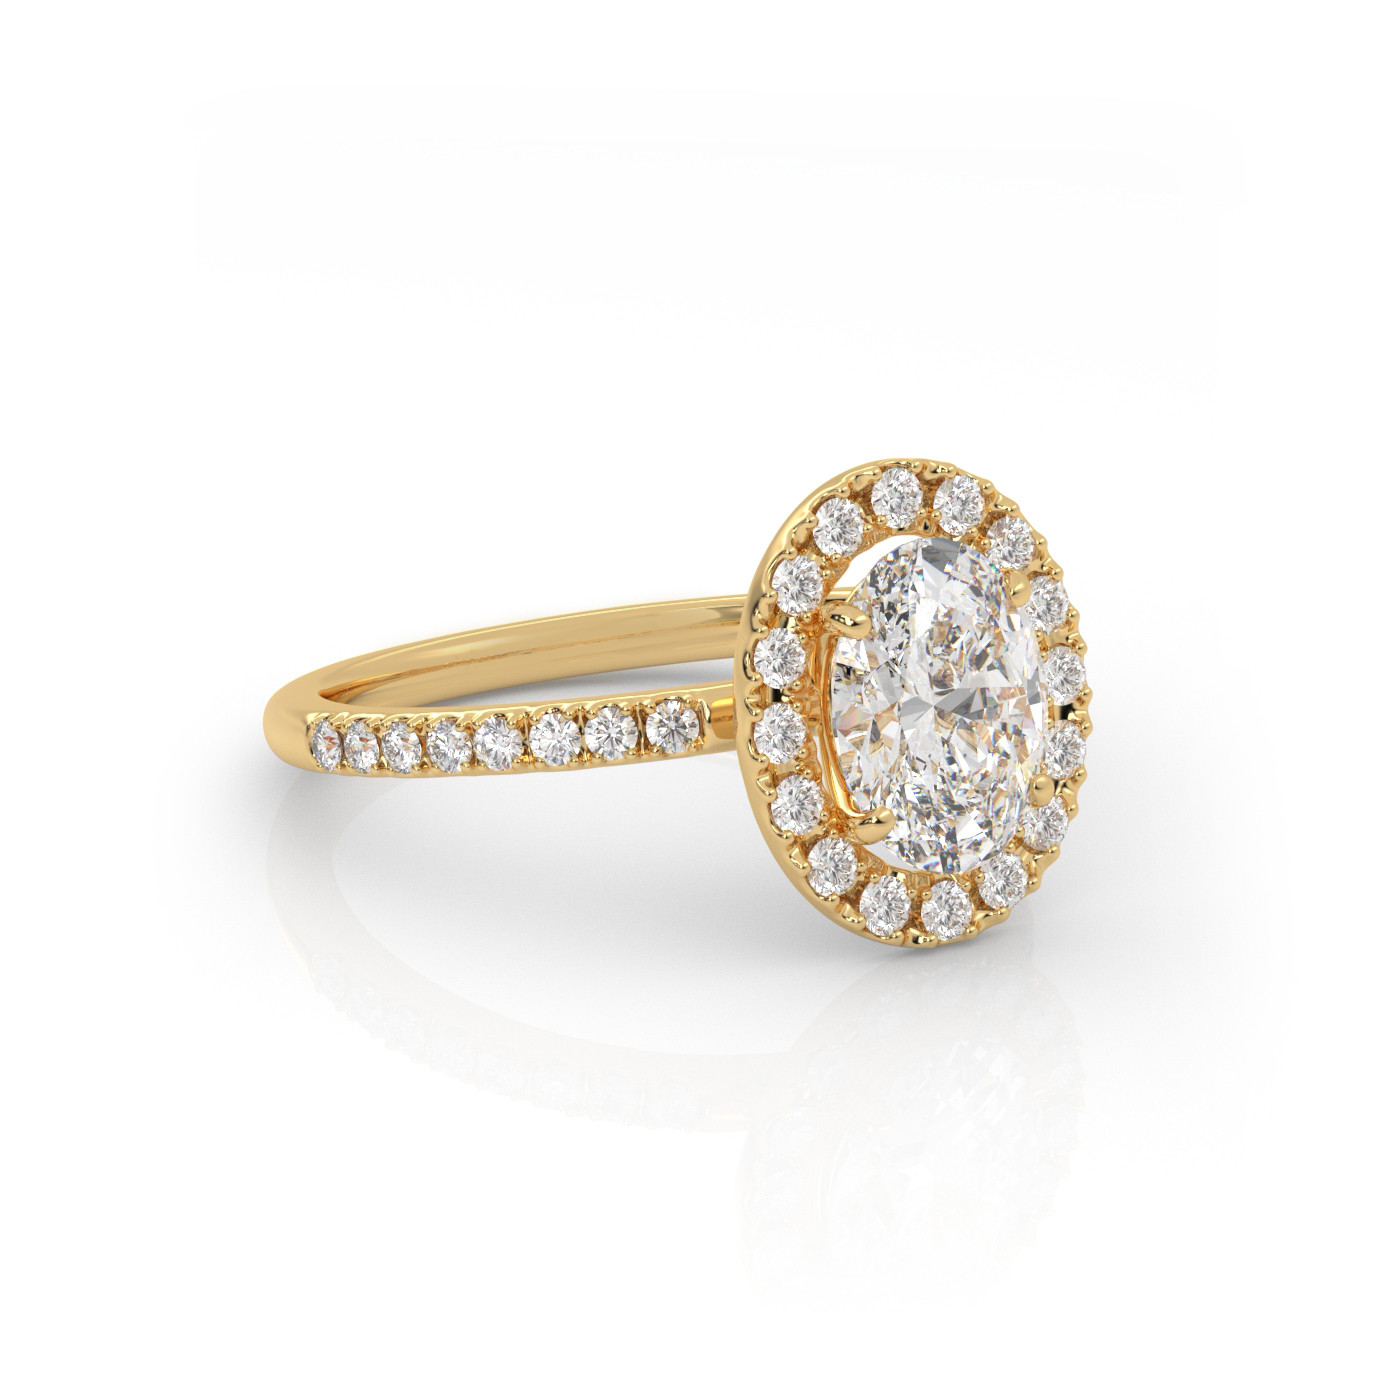 18K YELLOW GOLD Oval Diamond Engagament Ring With Halo and Pave style